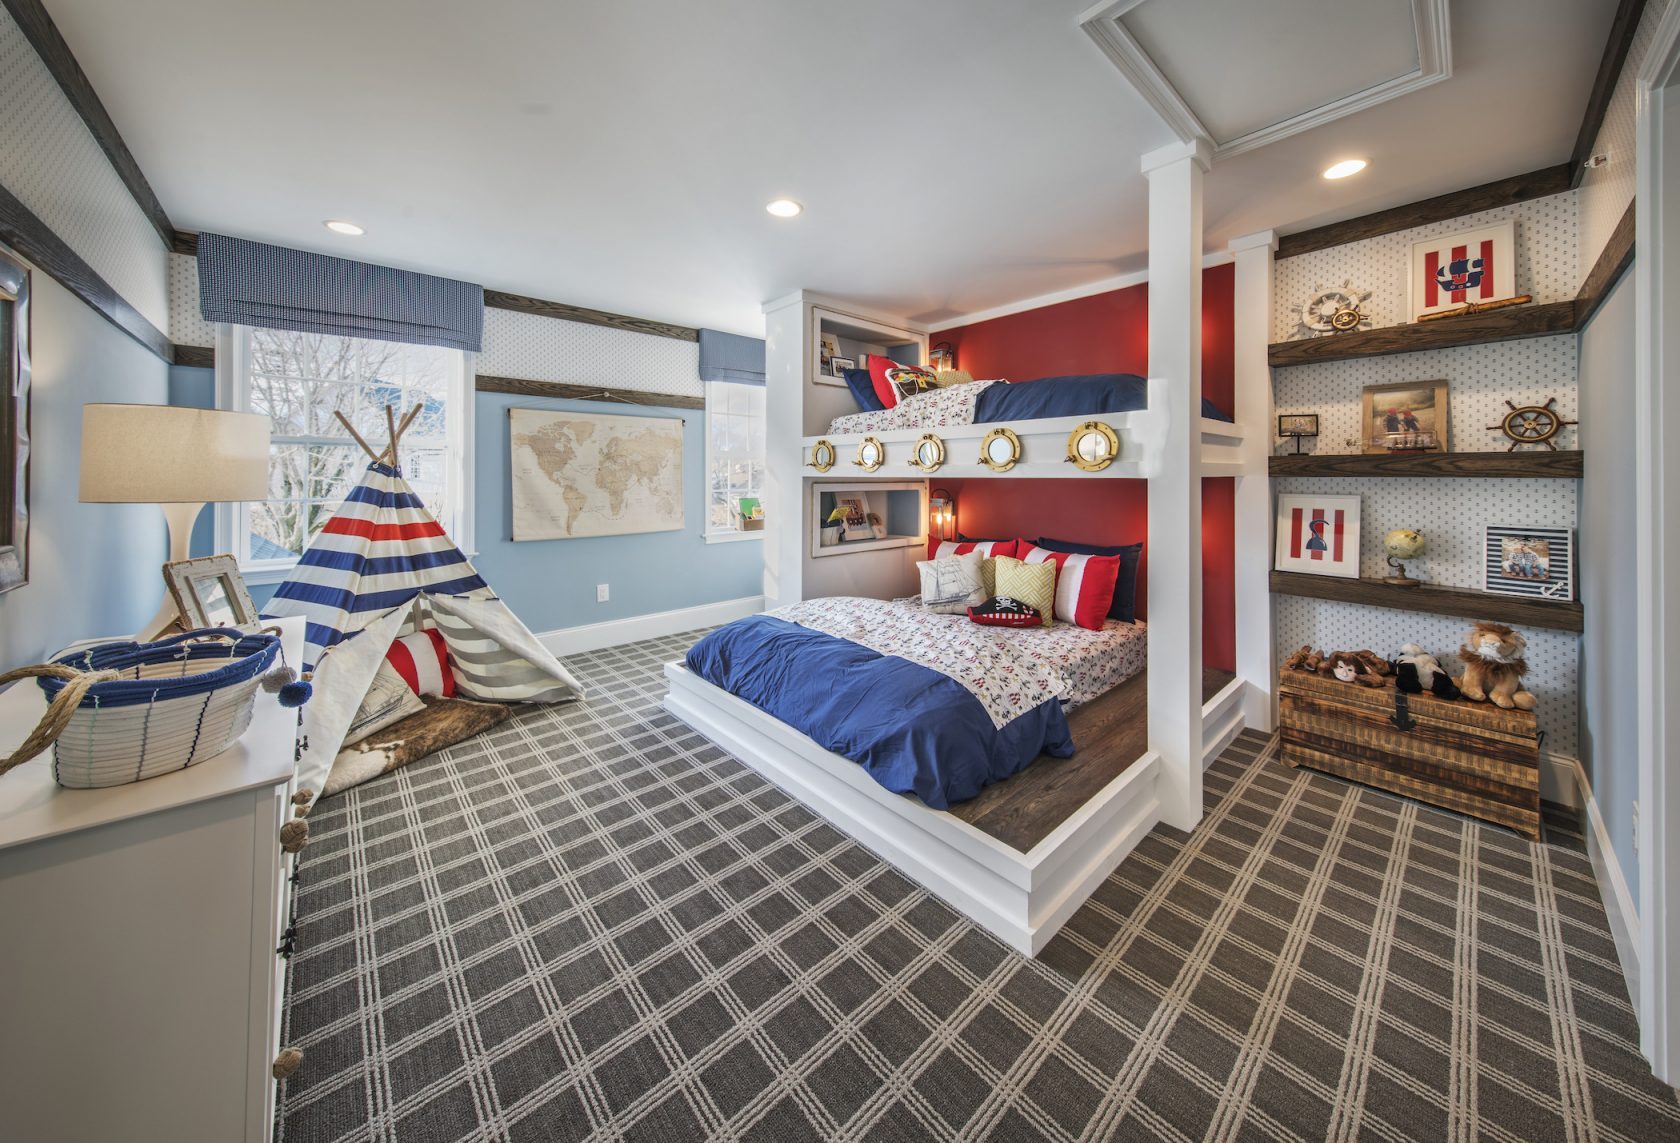 Inspiring kids bedroom featuring innovative bunk bed and geometric carpeting.